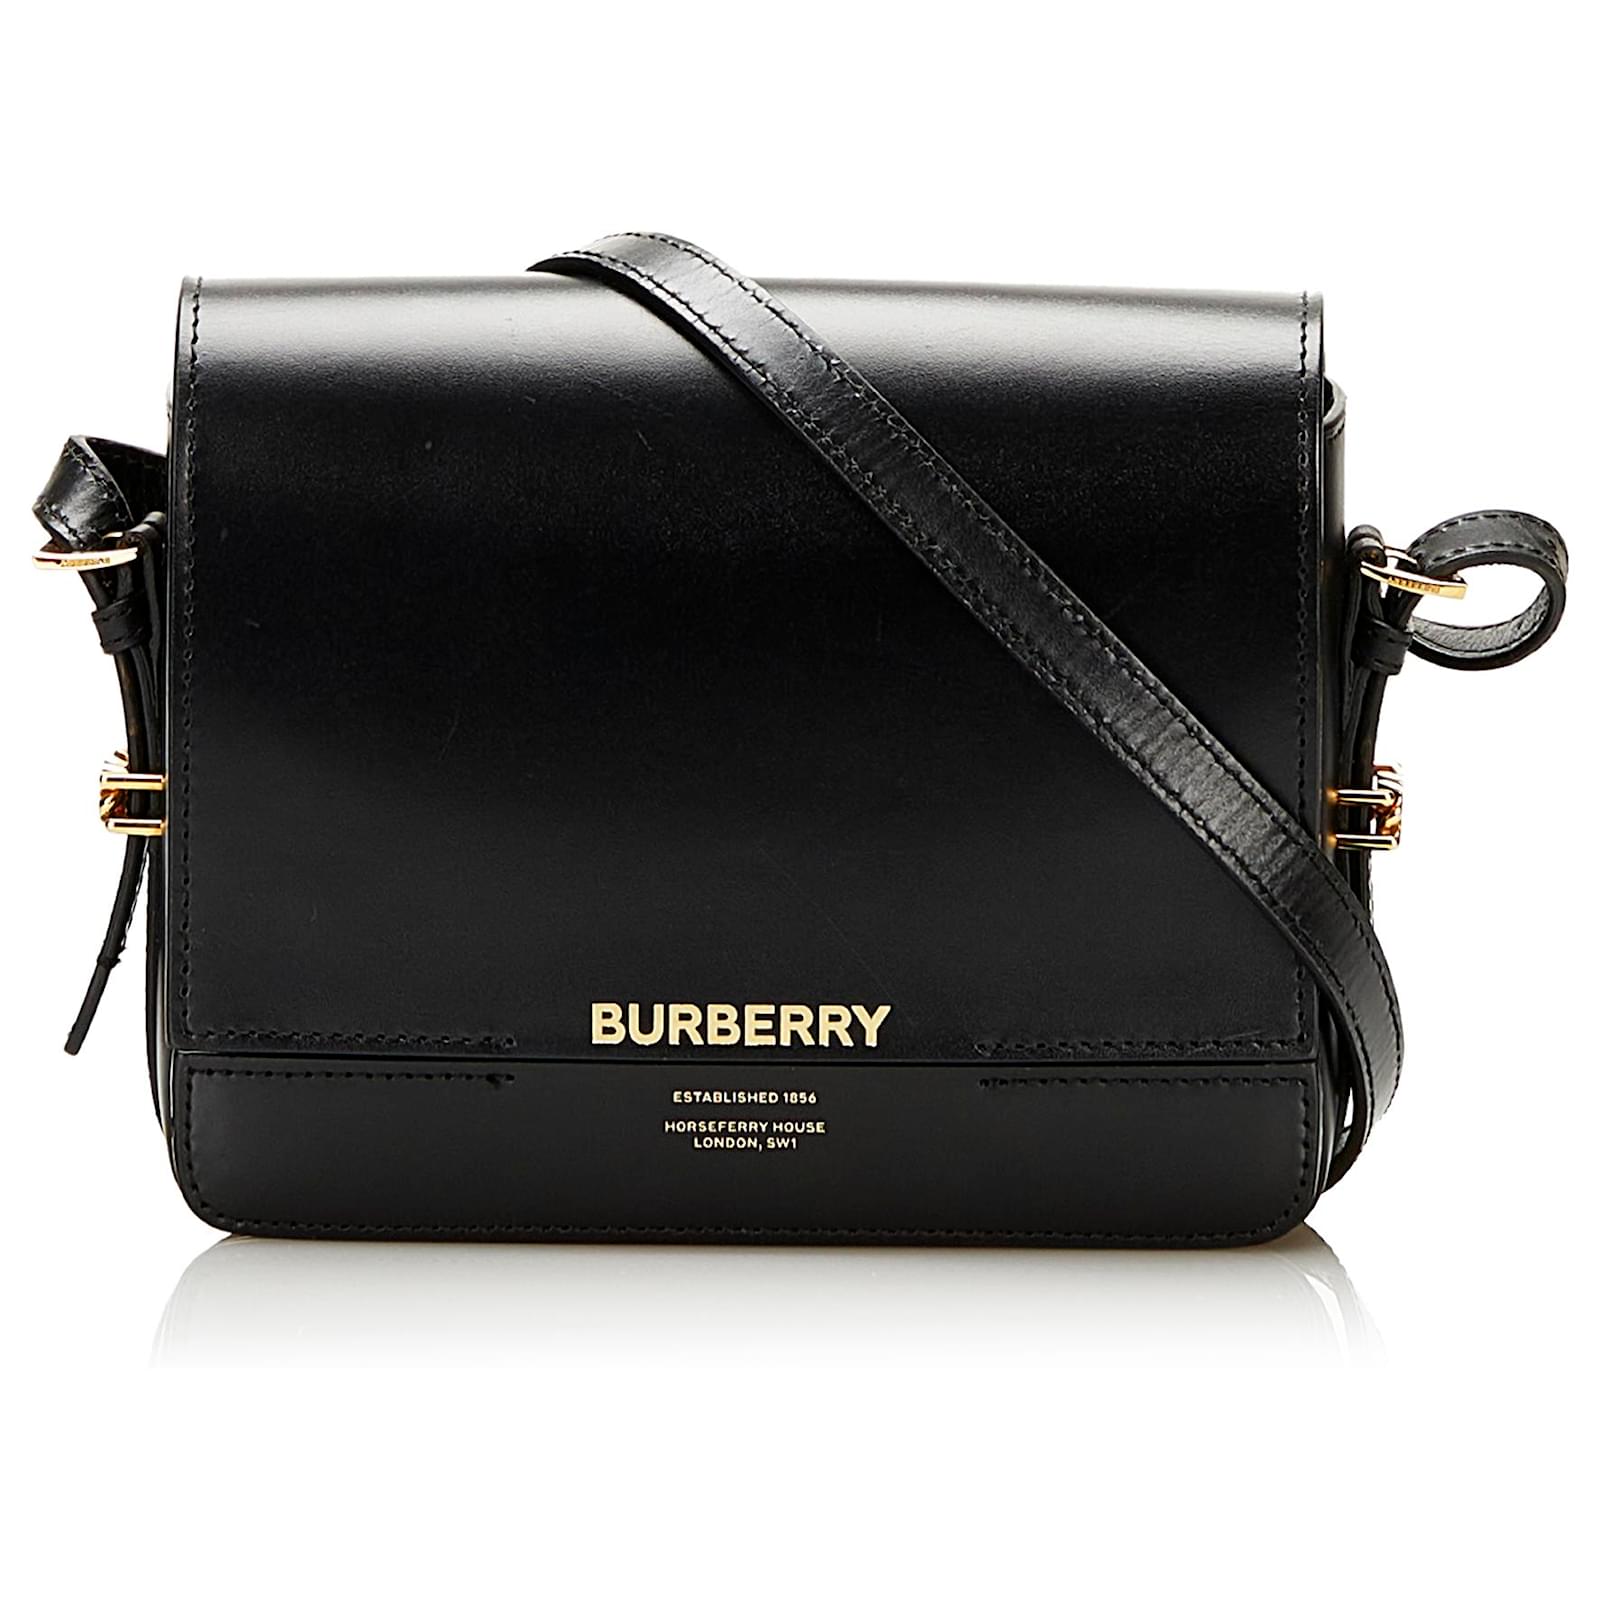 Burberry Black Smooth Leather Small Grace Crossbody Bag Burberry